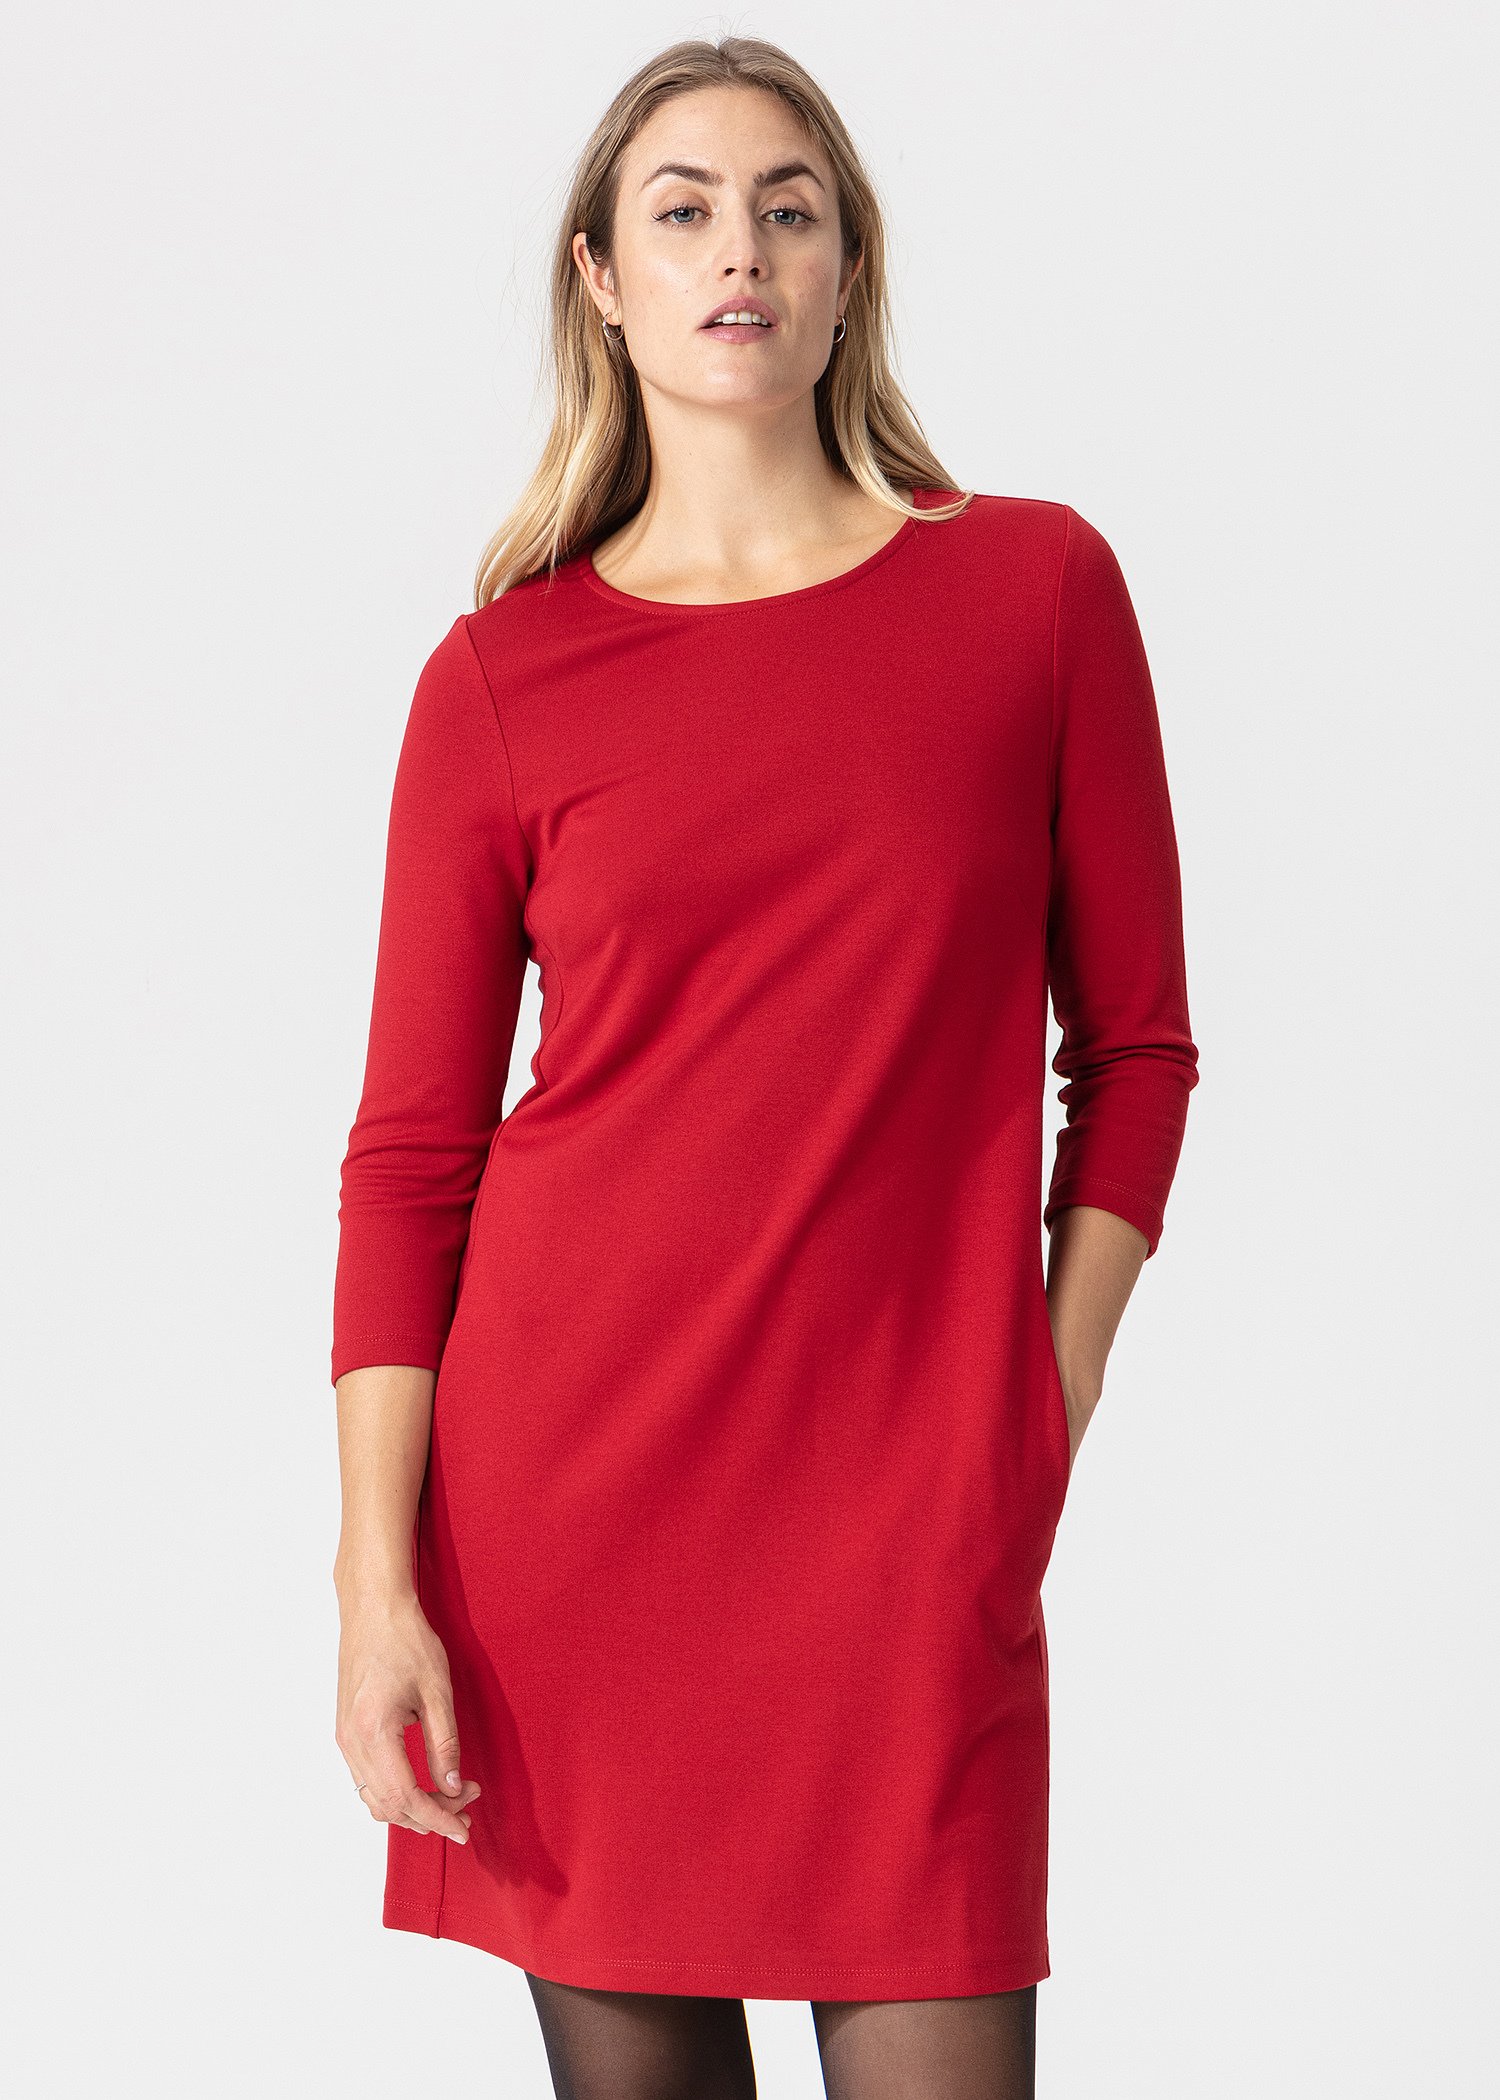 Red 3/4 sleeved tunic Image 0